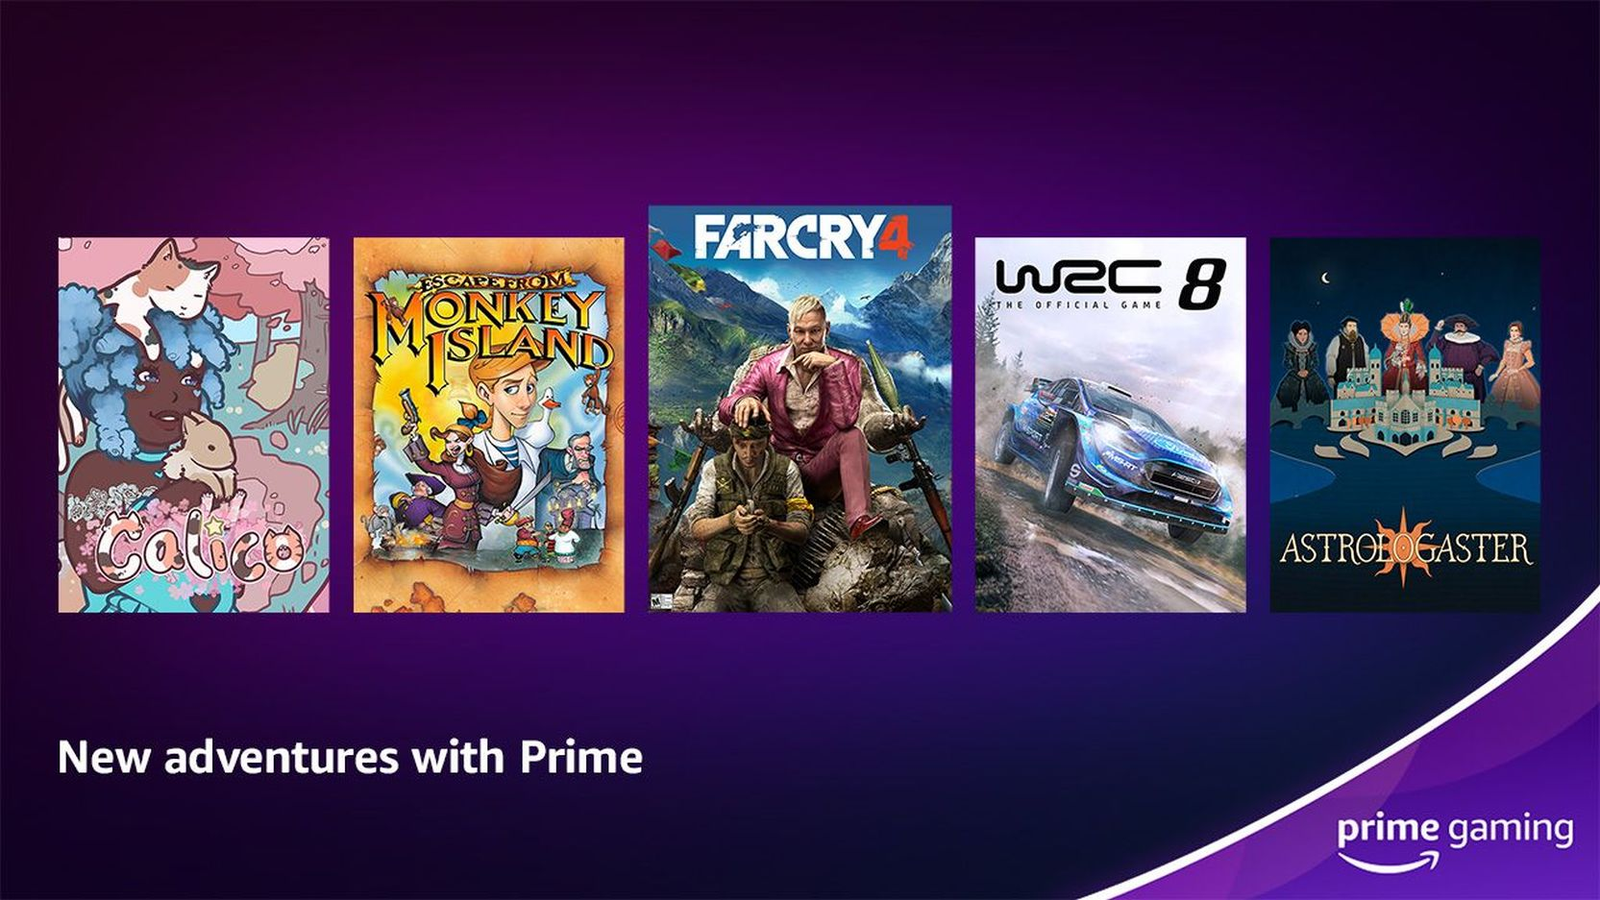 Twitch Prime is now Prime Gaming, but you can still expect plenty